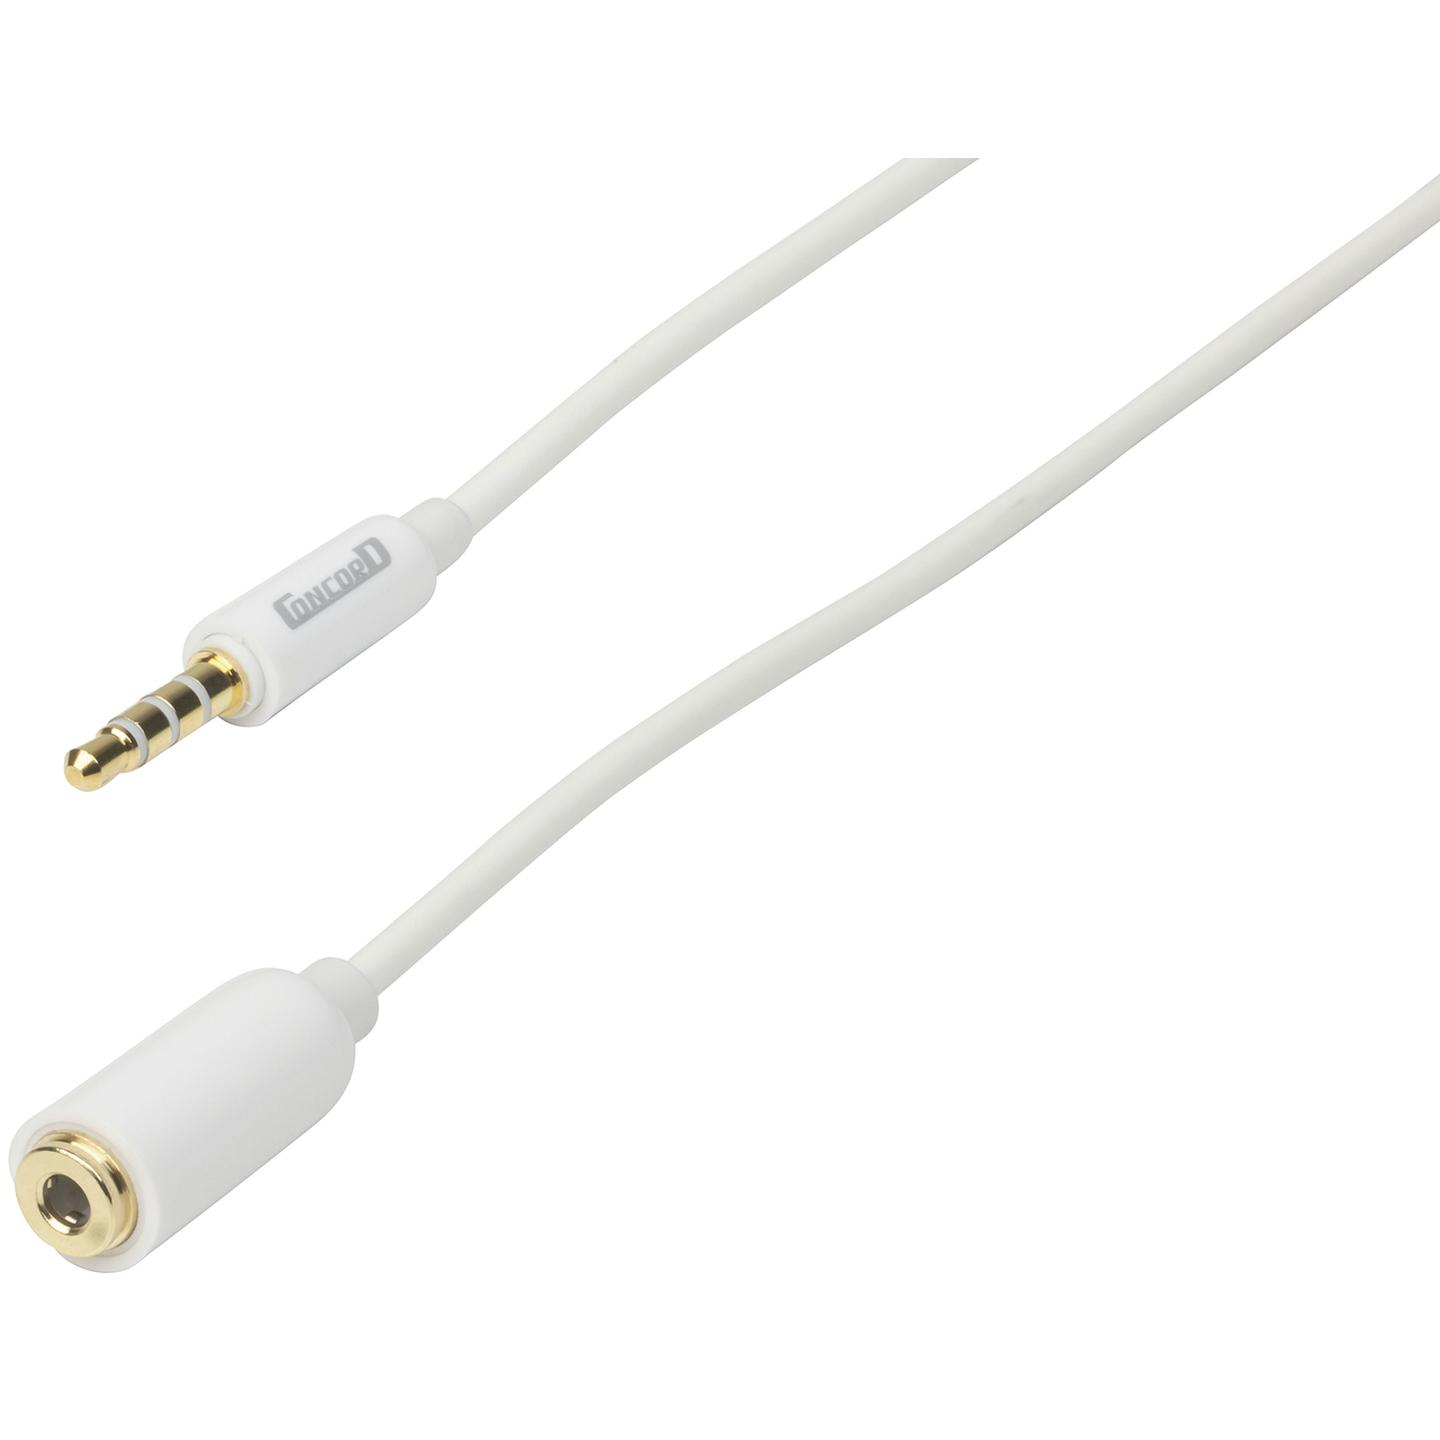 3.5mm 4 Pole Plug to 3.5mm 4 Pole Socket AV Extension Cable - 2m